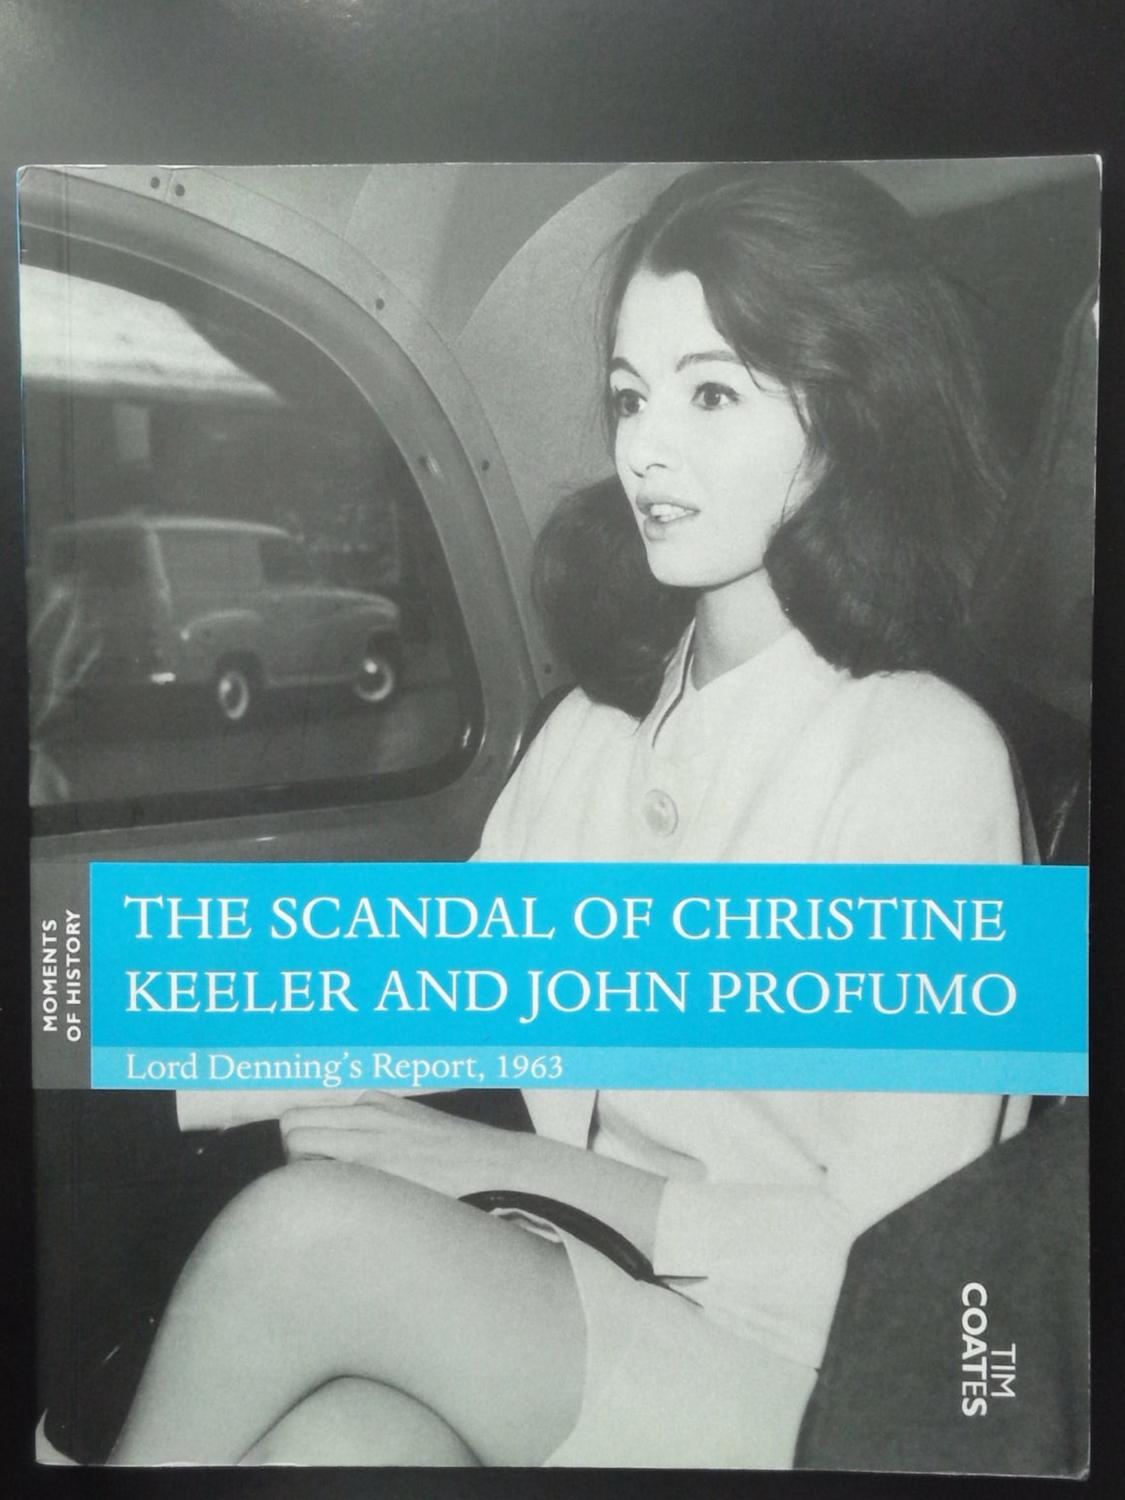 The Scandal of Christine Keeler and John Profumo: Lord Denning's Report, 1963 (Moments of History S.) [Paperback] Coates, Tim - Coates, Tim